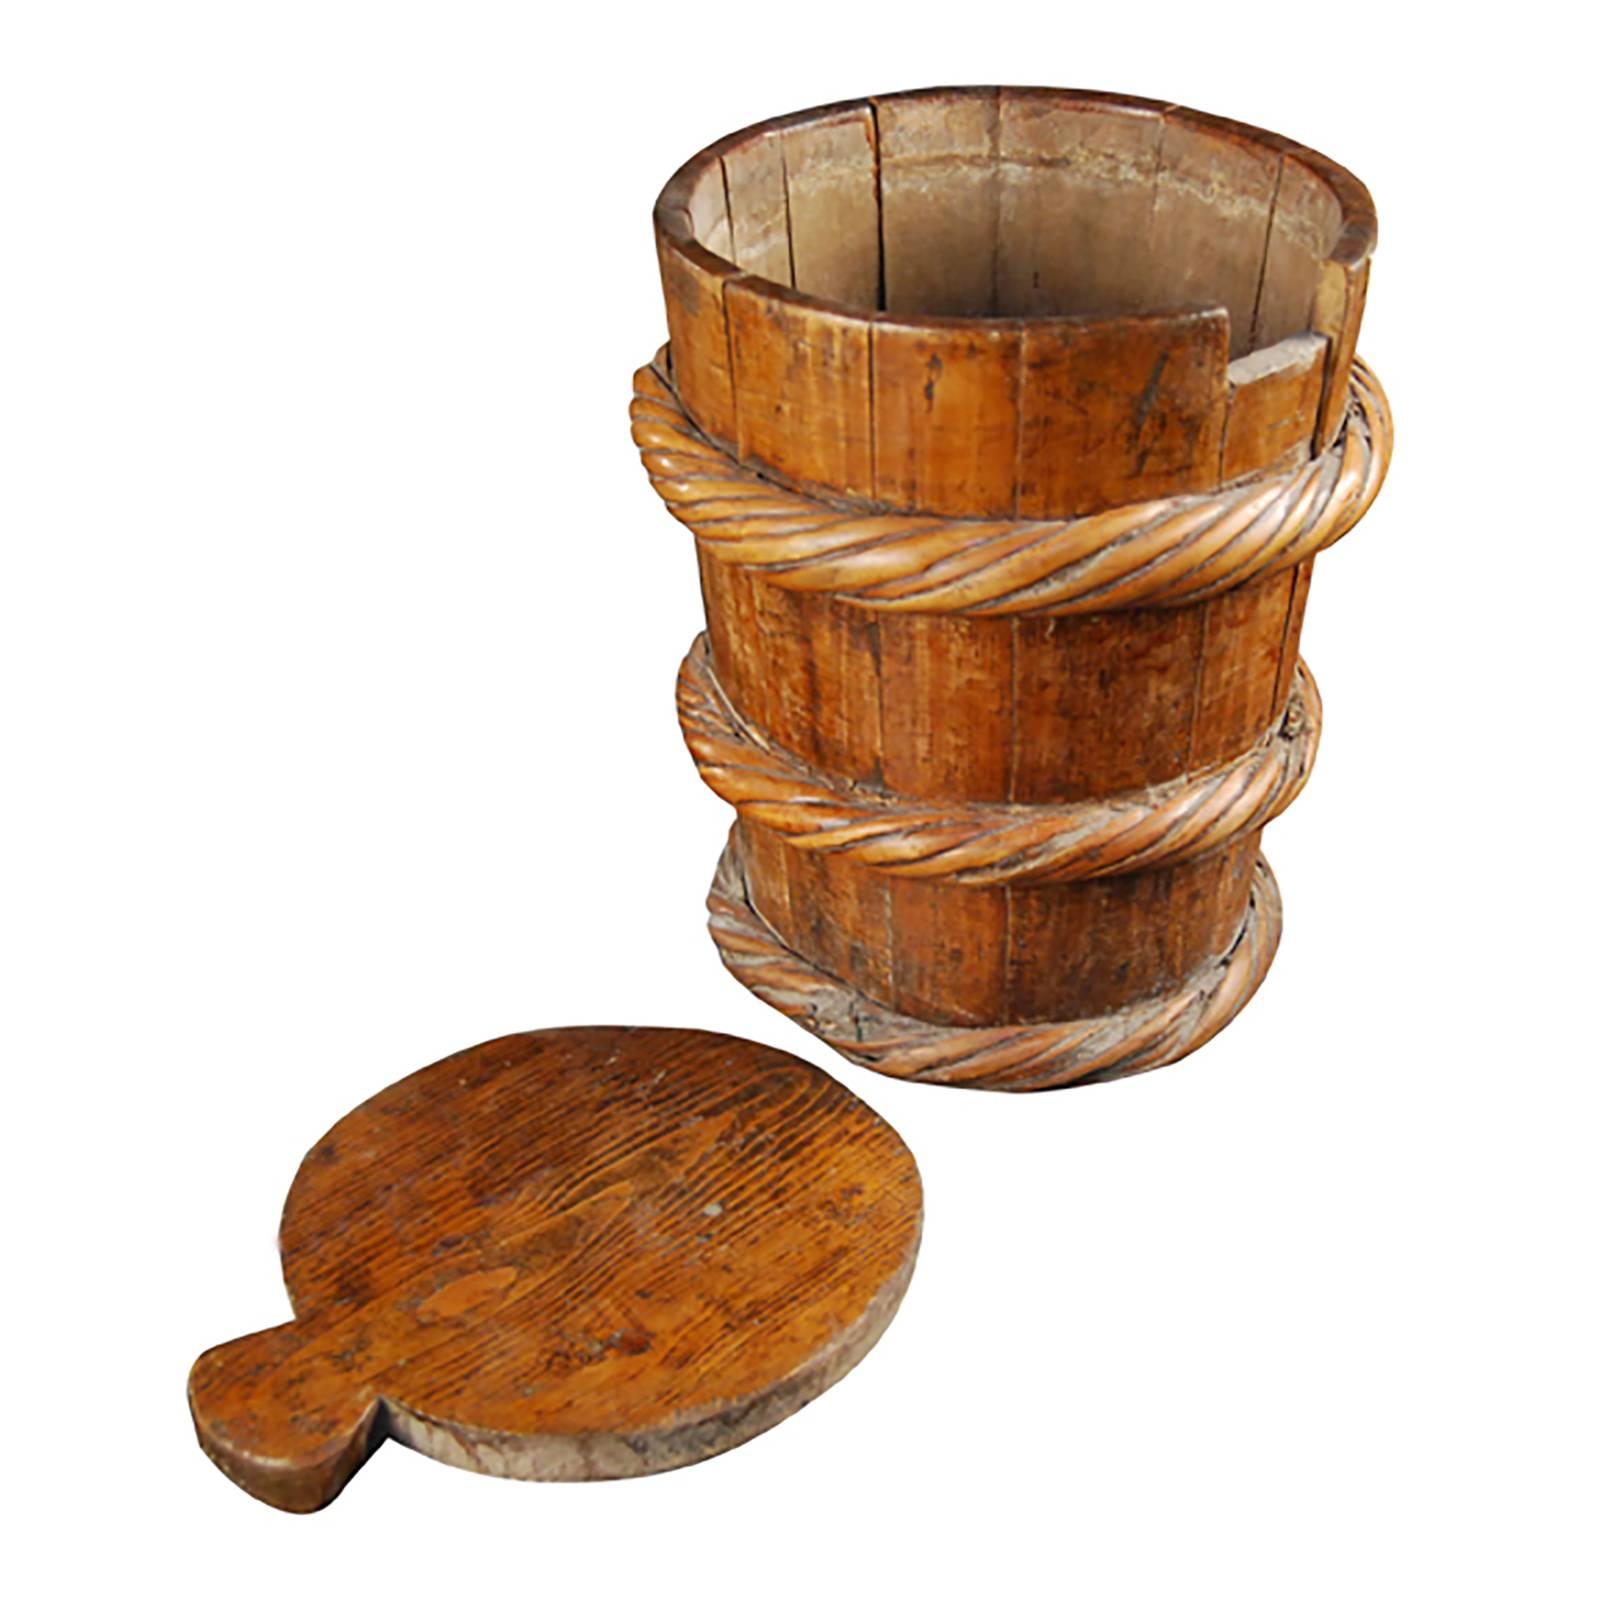 Food was scarce in the Tibetan highlands and had to be carefully rationed, so nothing wasted. This rustic yet well designed container was used over a century ago to transport and store a nutritious butter made from yak’s milk. It is carved out of